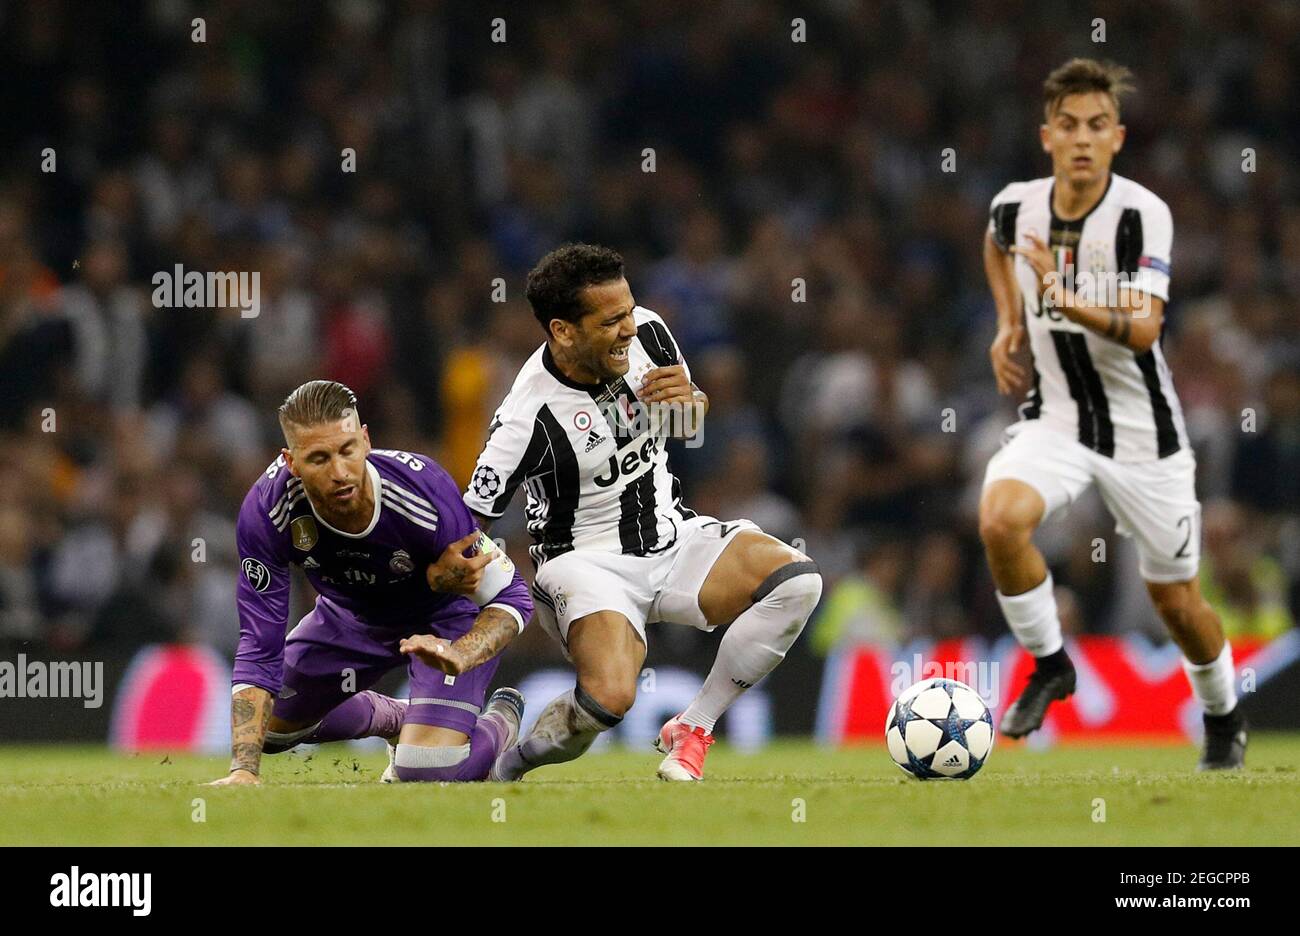 Britain Soccer Football - Juventus v Real Madrid - UEFA Champions League  Final - The National Stadium of Wales, Cardiff - June 3, 2017 Juventus' Dani  Alves is fouled by Real Madrid's